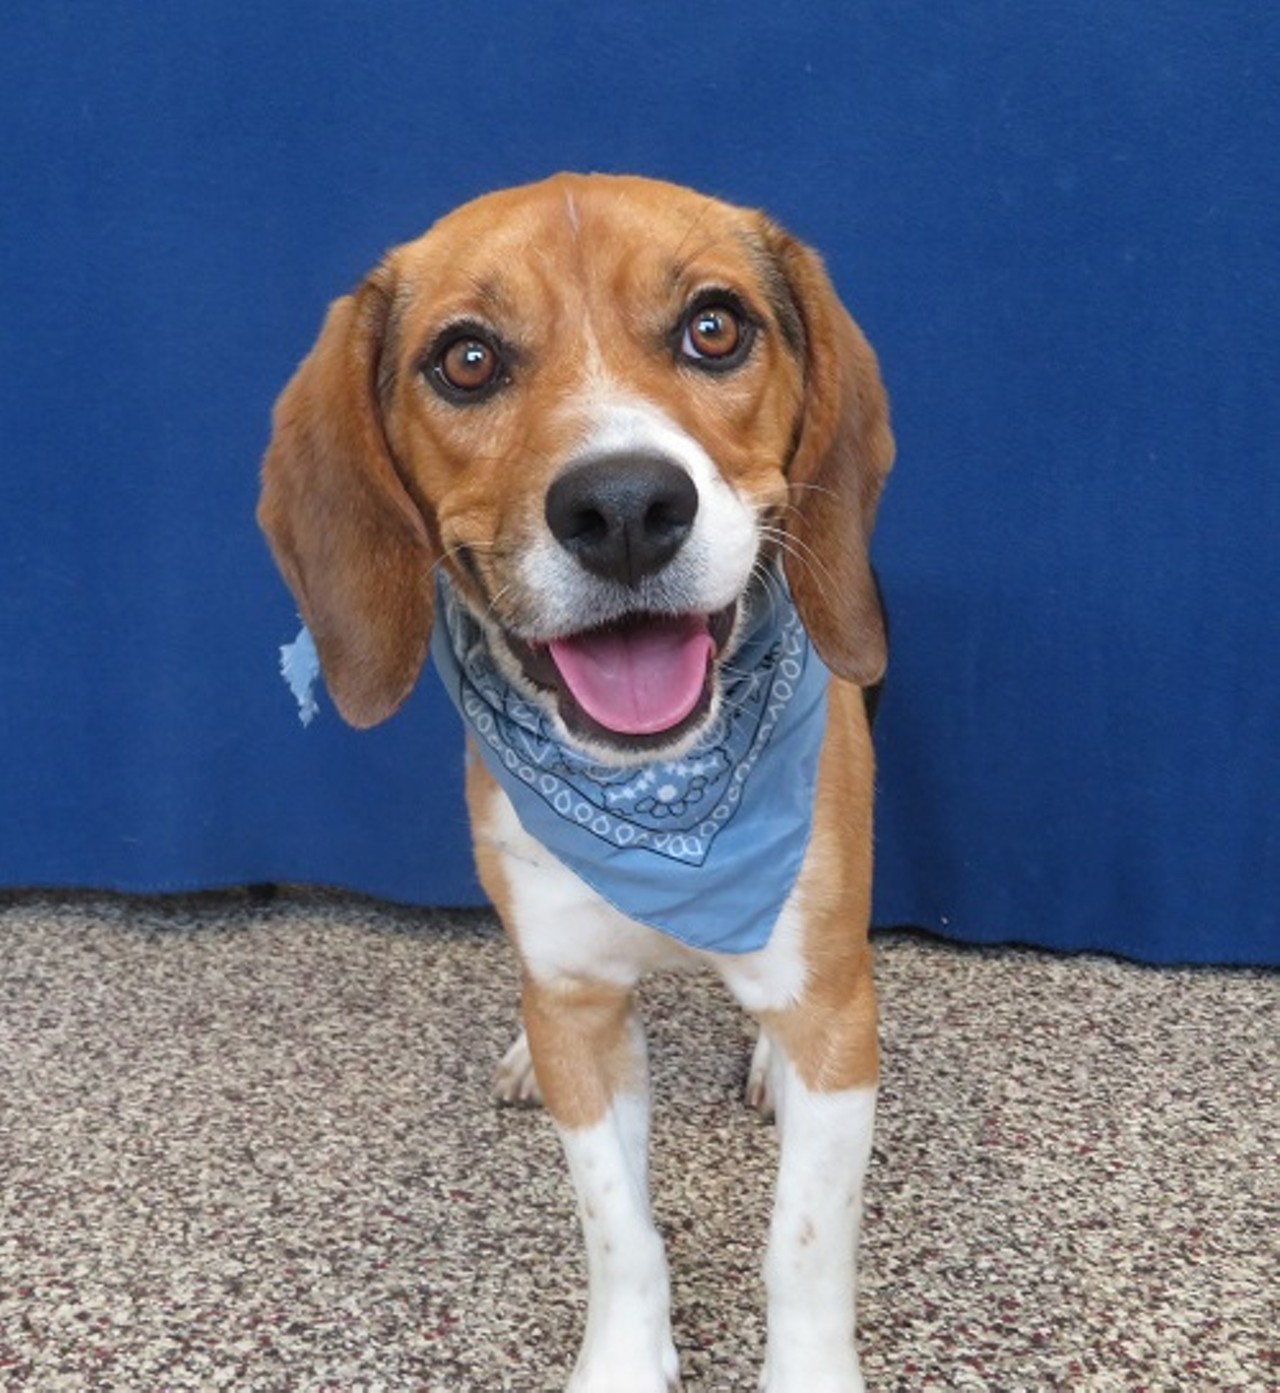 NAME:  Moe
GENDER: Male
BREED: Beagle
AGE: 1 year
WEIGHT: 27 pounds
SPECIAL CONSIDERATIONS: None
REASON I CAME TO MHS: Homeless in Detroit
LOCATION: Mackey Center for Animal Care in Detroit
ID NUMBER: 868400